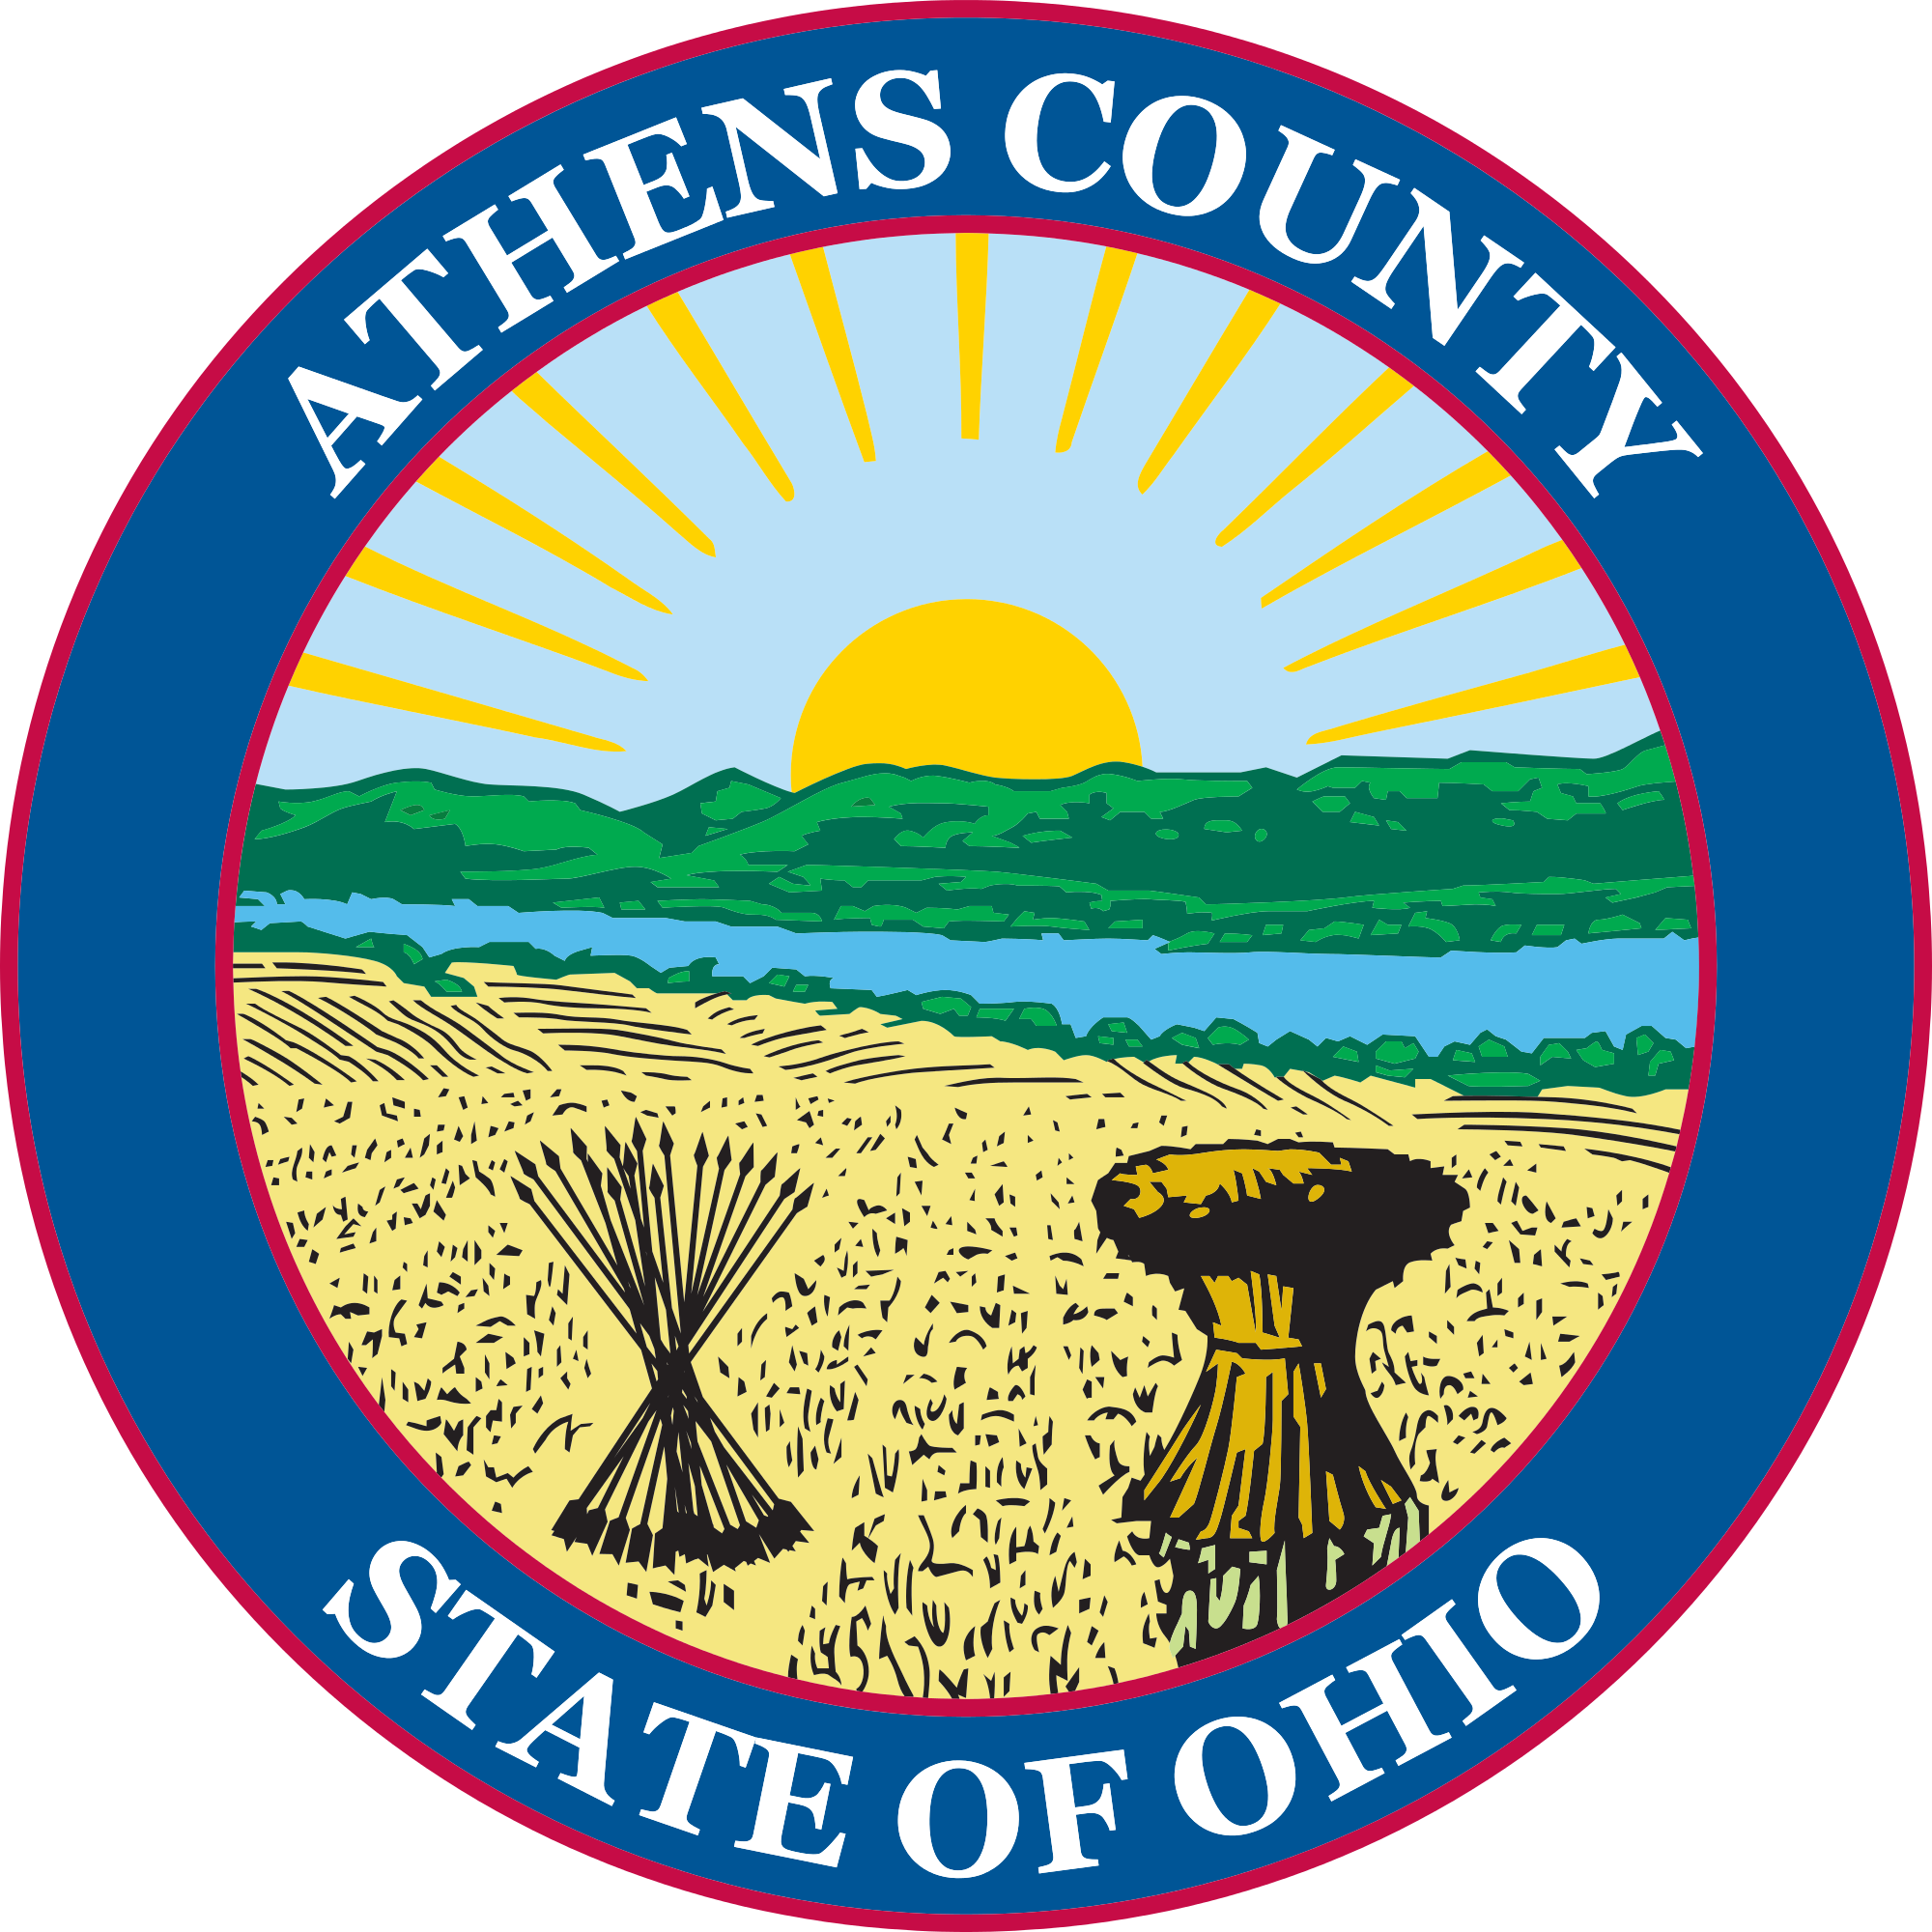 Image result for Athens county ohio logo